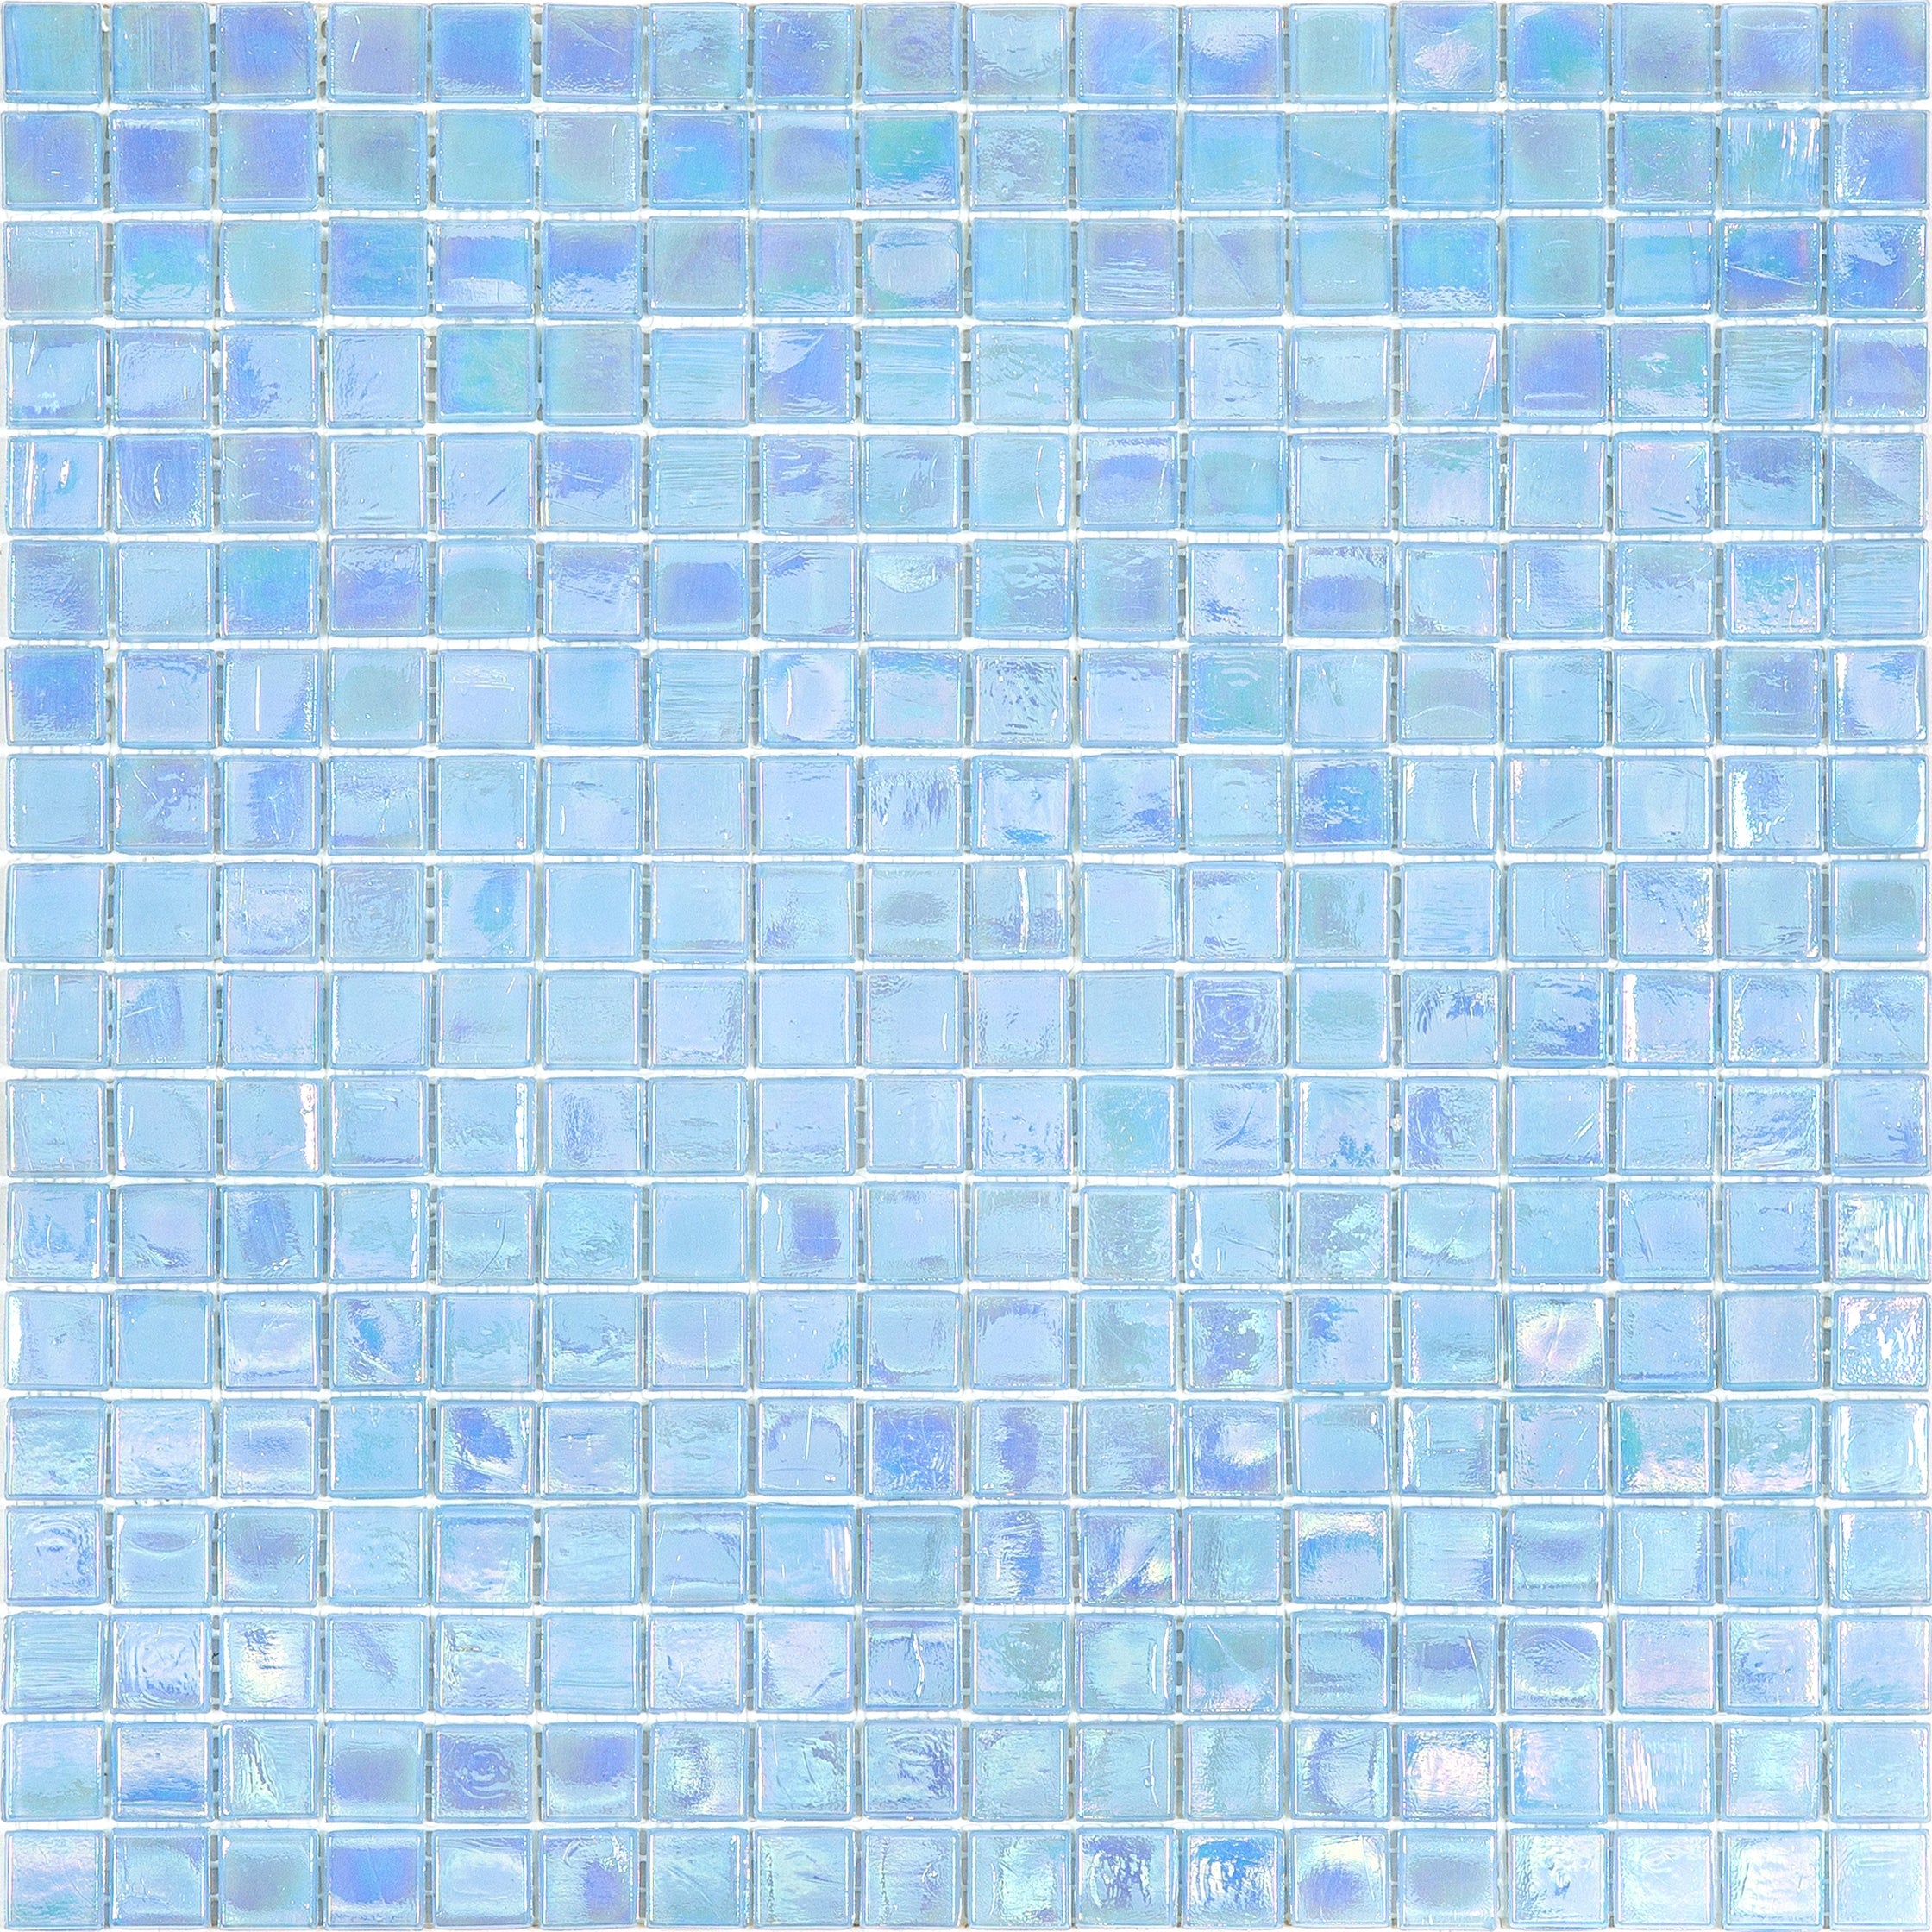 mir alma solid colors 0_6 inch nibble ne20 wall and floor mosaic distributed by surface group natural materials